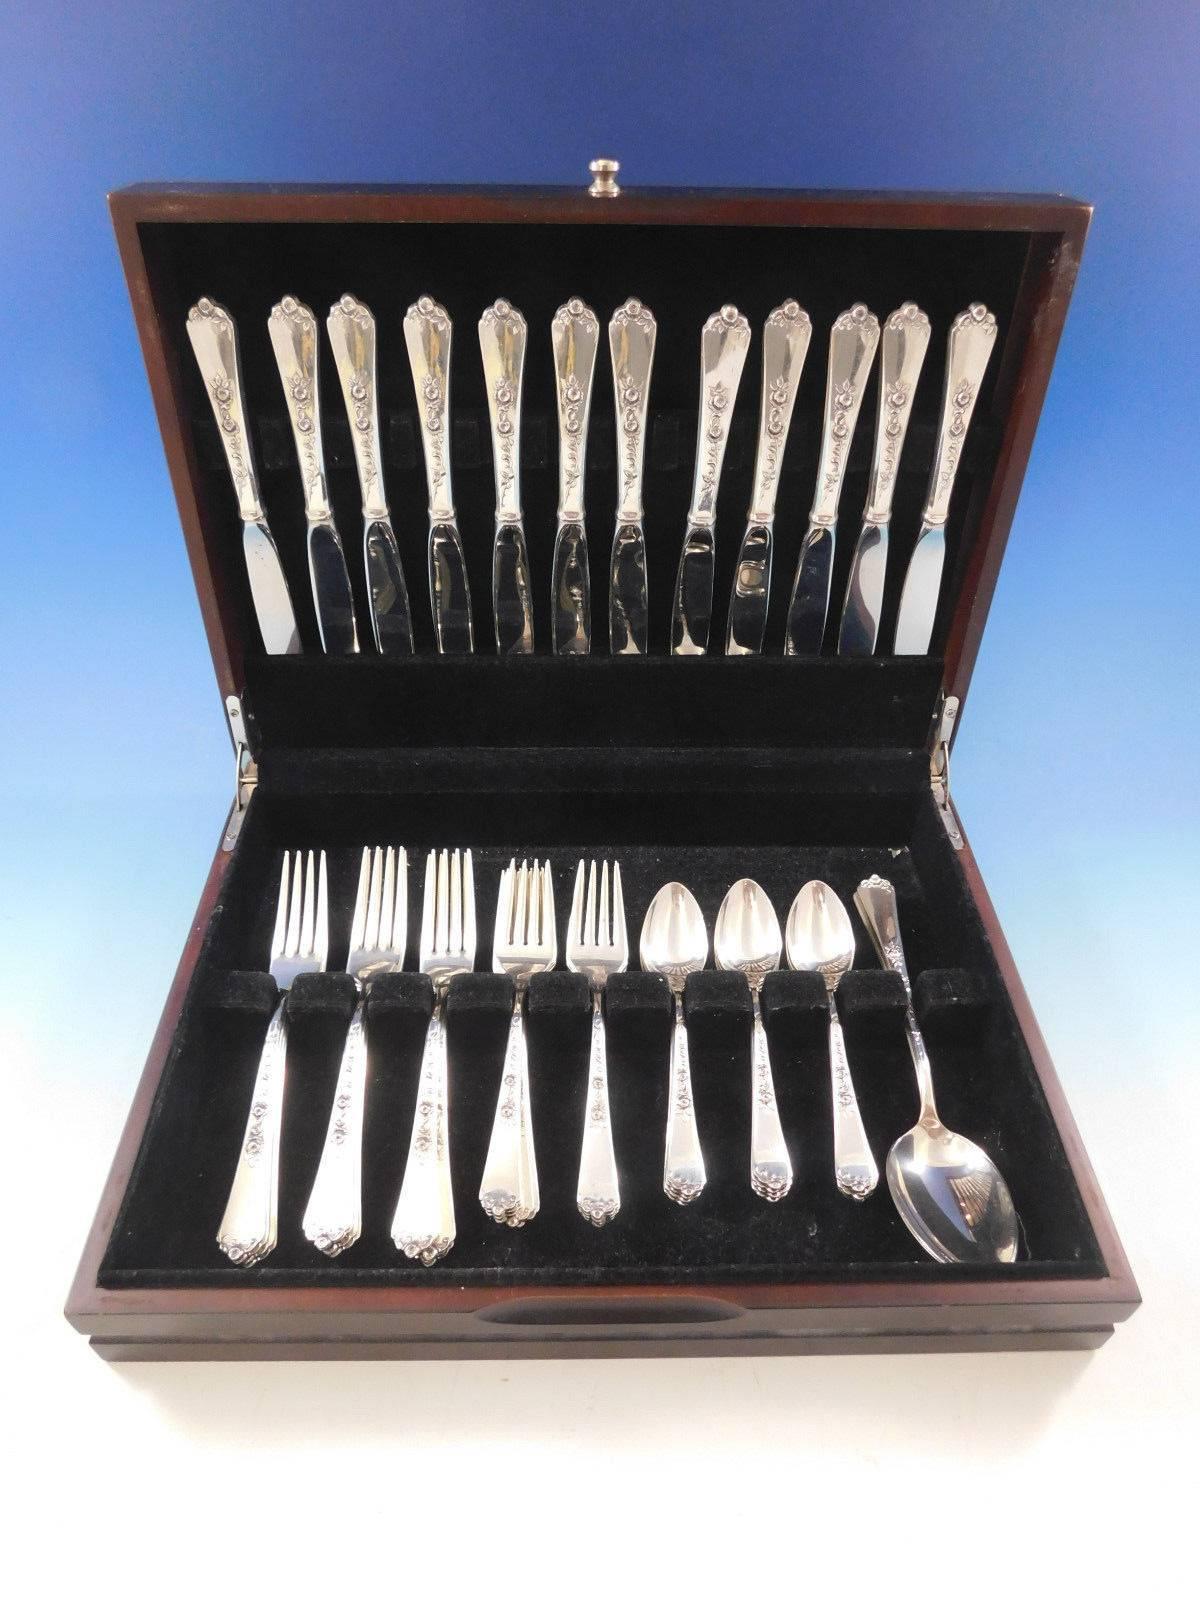 Stunning Sterling Rose by Wallace sterling silver Flatware set - 50 pieces. This set includes:

12 Knives, 8 7/8